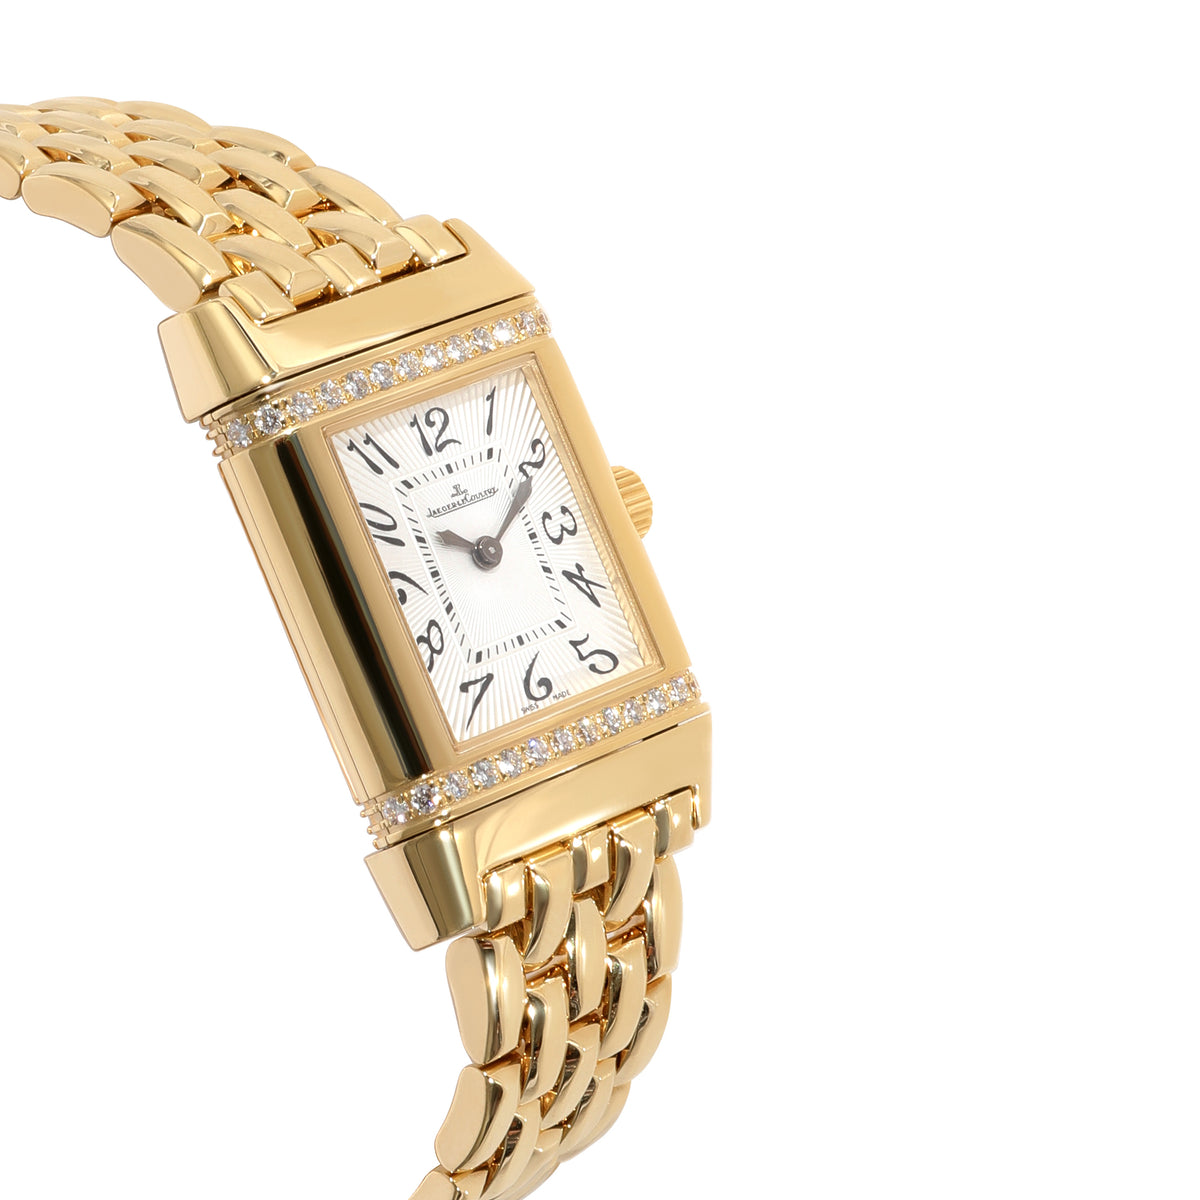 Jaeger-LeCoultre Reverso 265.1.08 Women's Watch in 18kt Yellow Gold